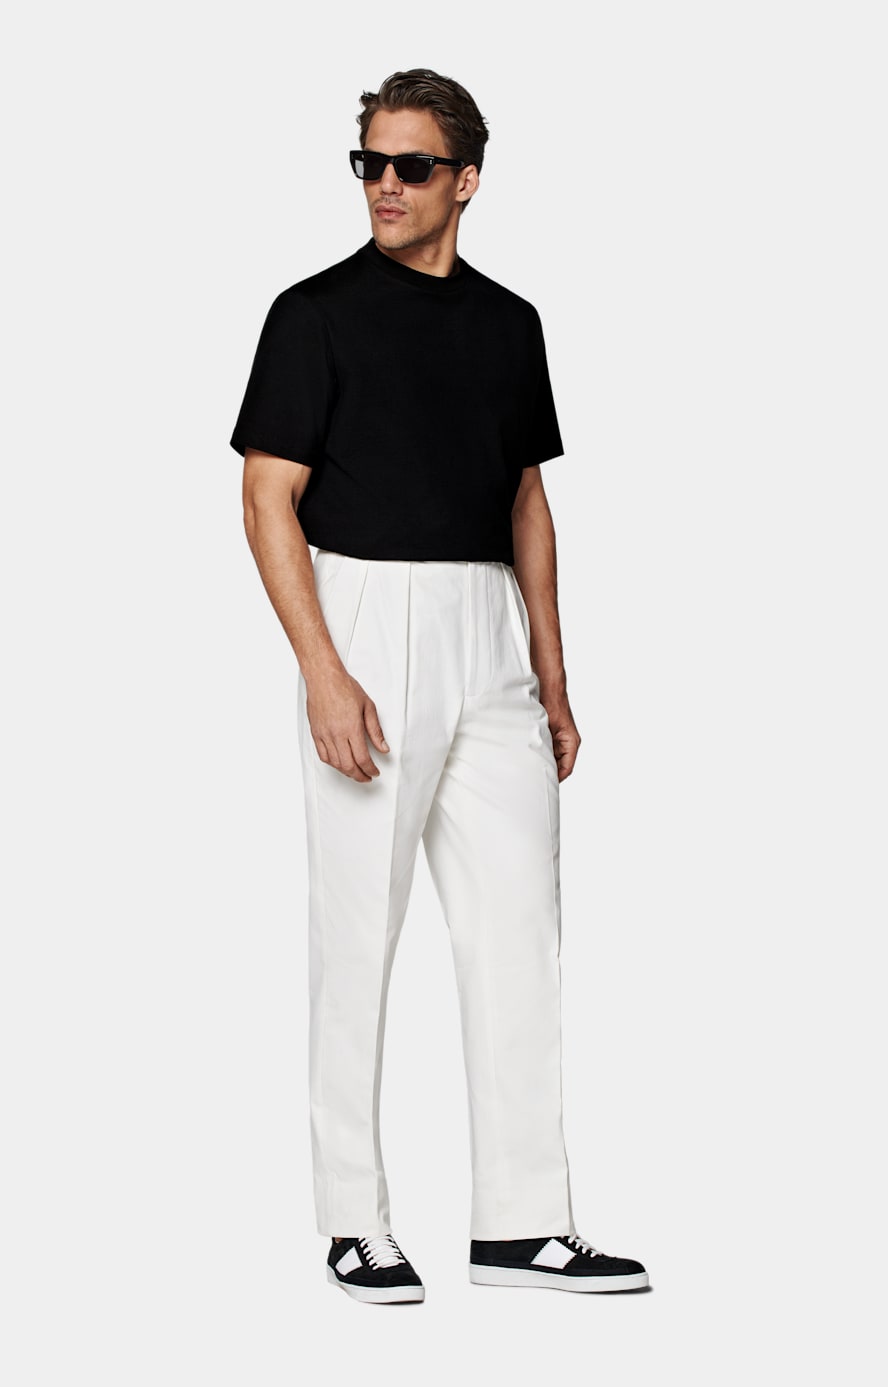 Mira Hose off-white wide Leg tapered